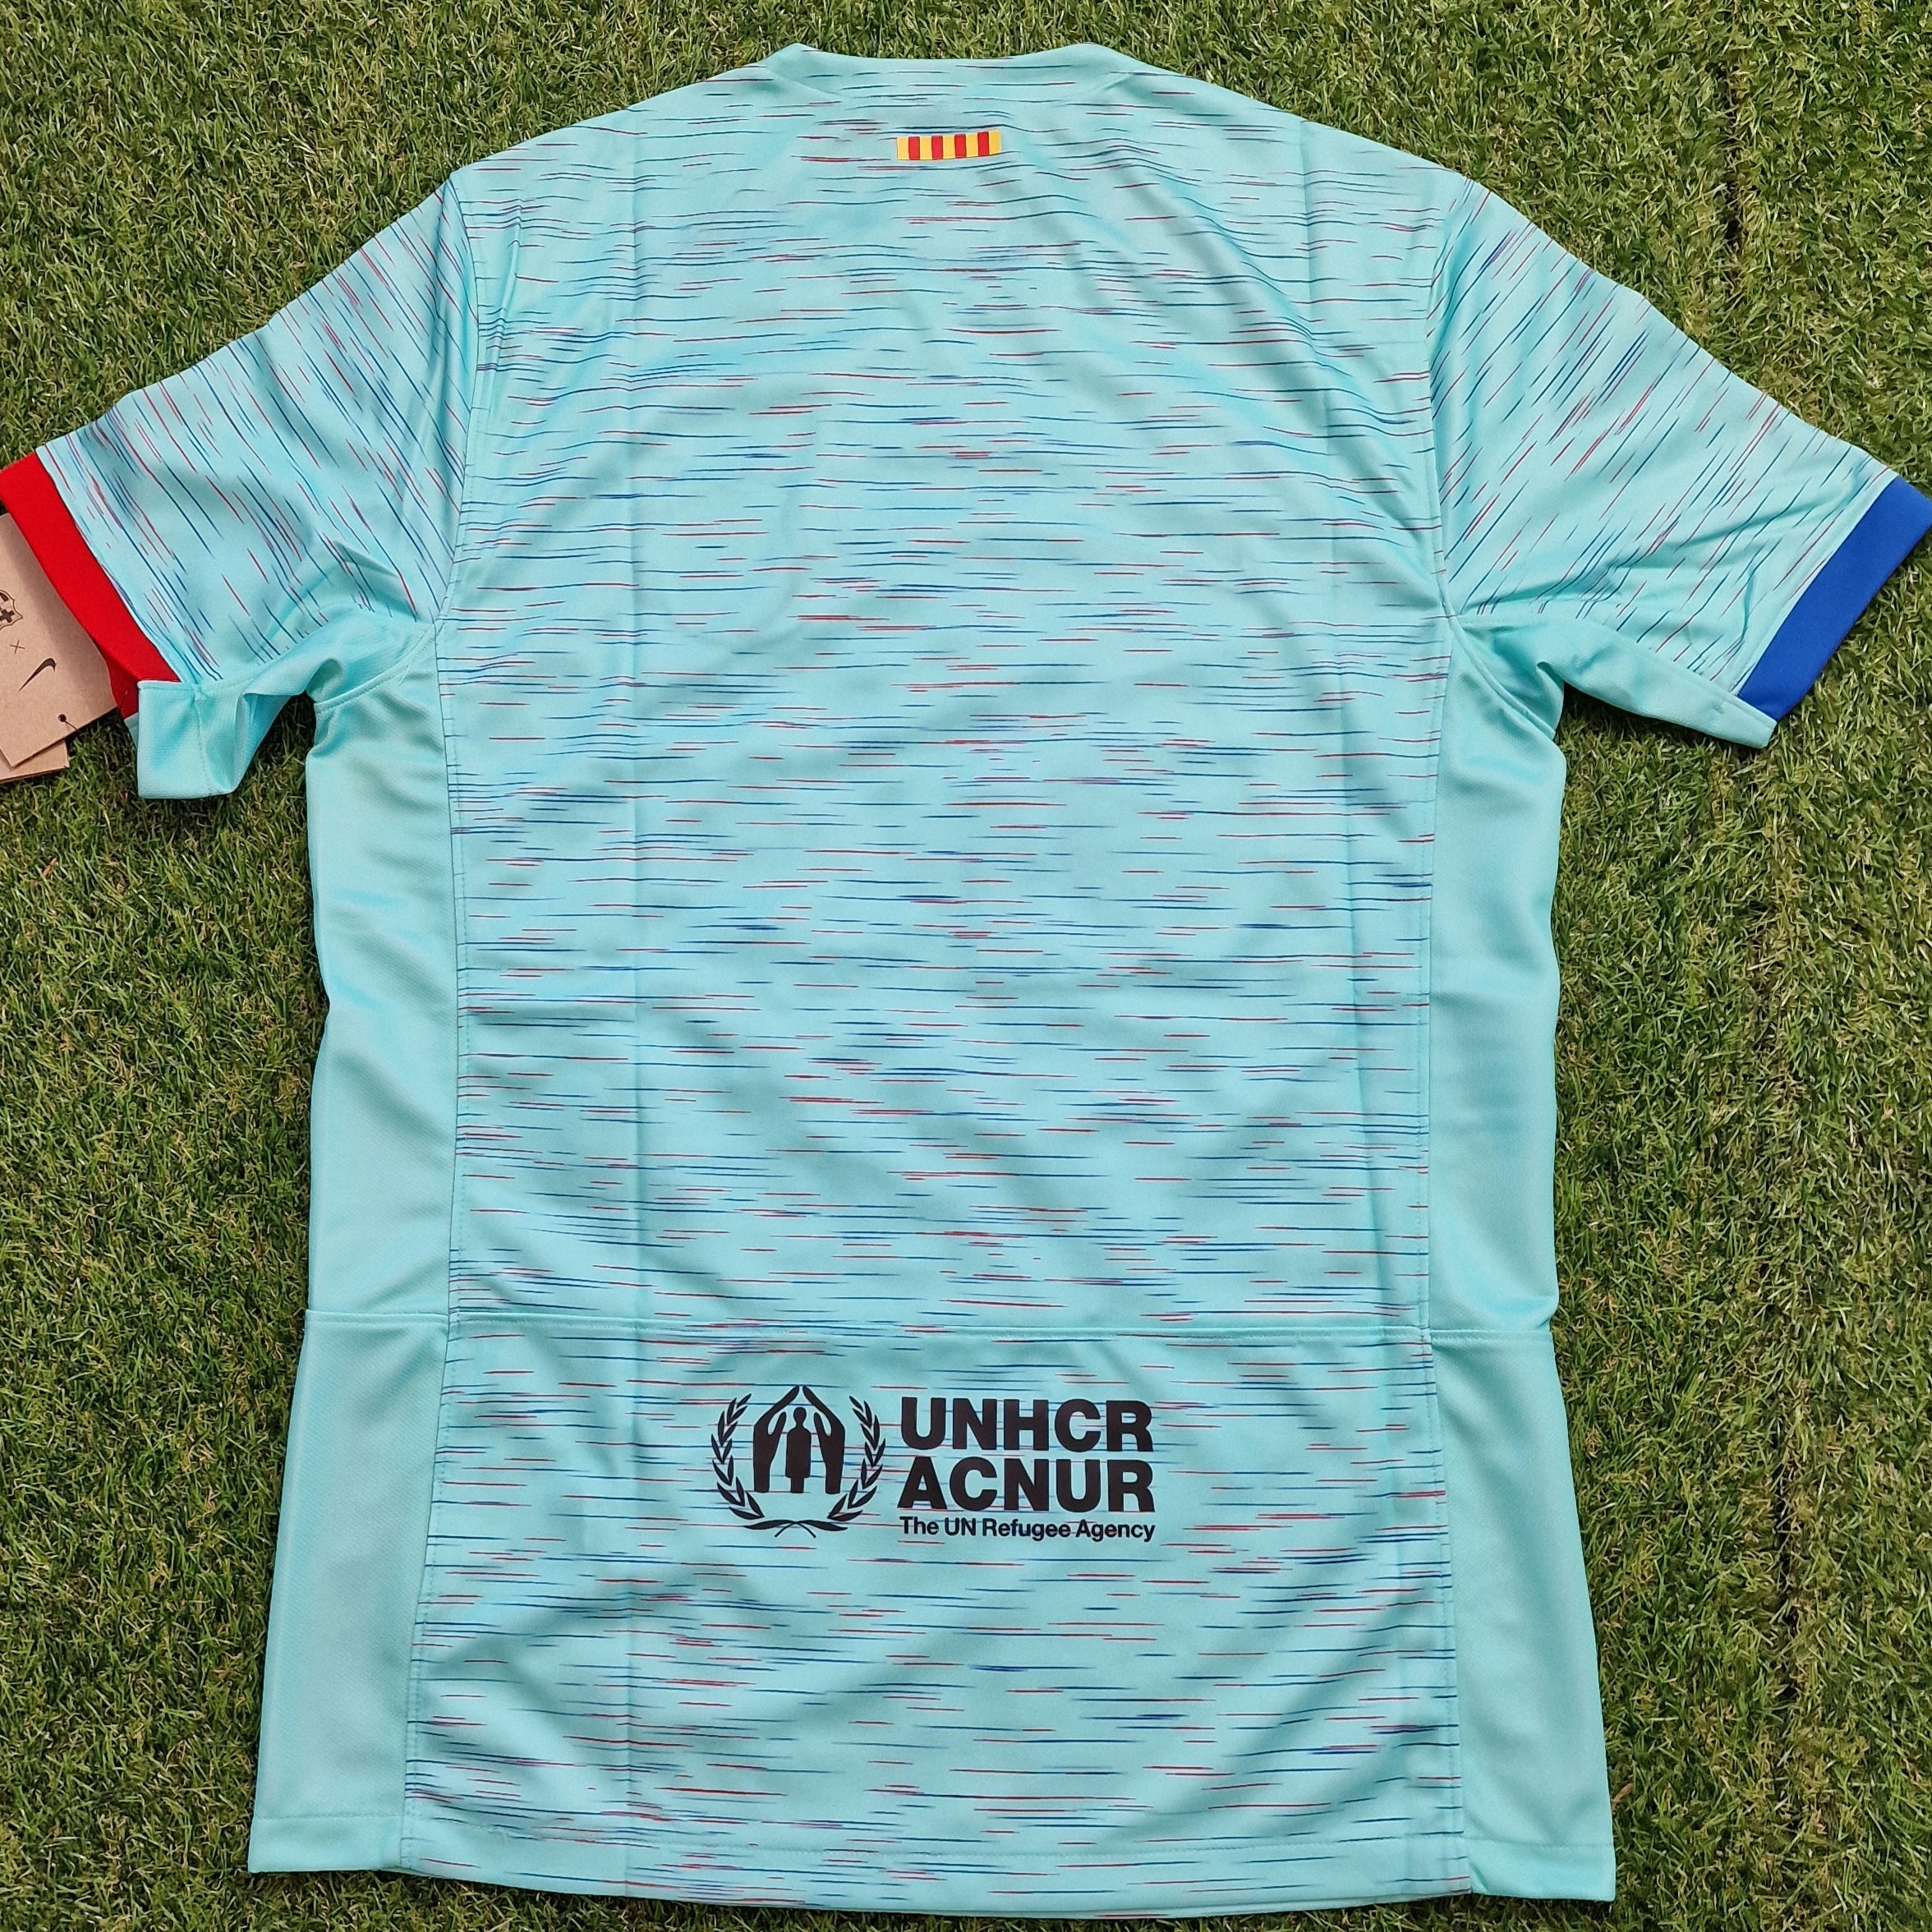 Aqua Barcelona Nike Third Shirt 23/24, crafted from sustainable 100% recycled polyester with a unique pattern aimed at reducing material waste, showcasing the iconic club crest and sponsor logos.